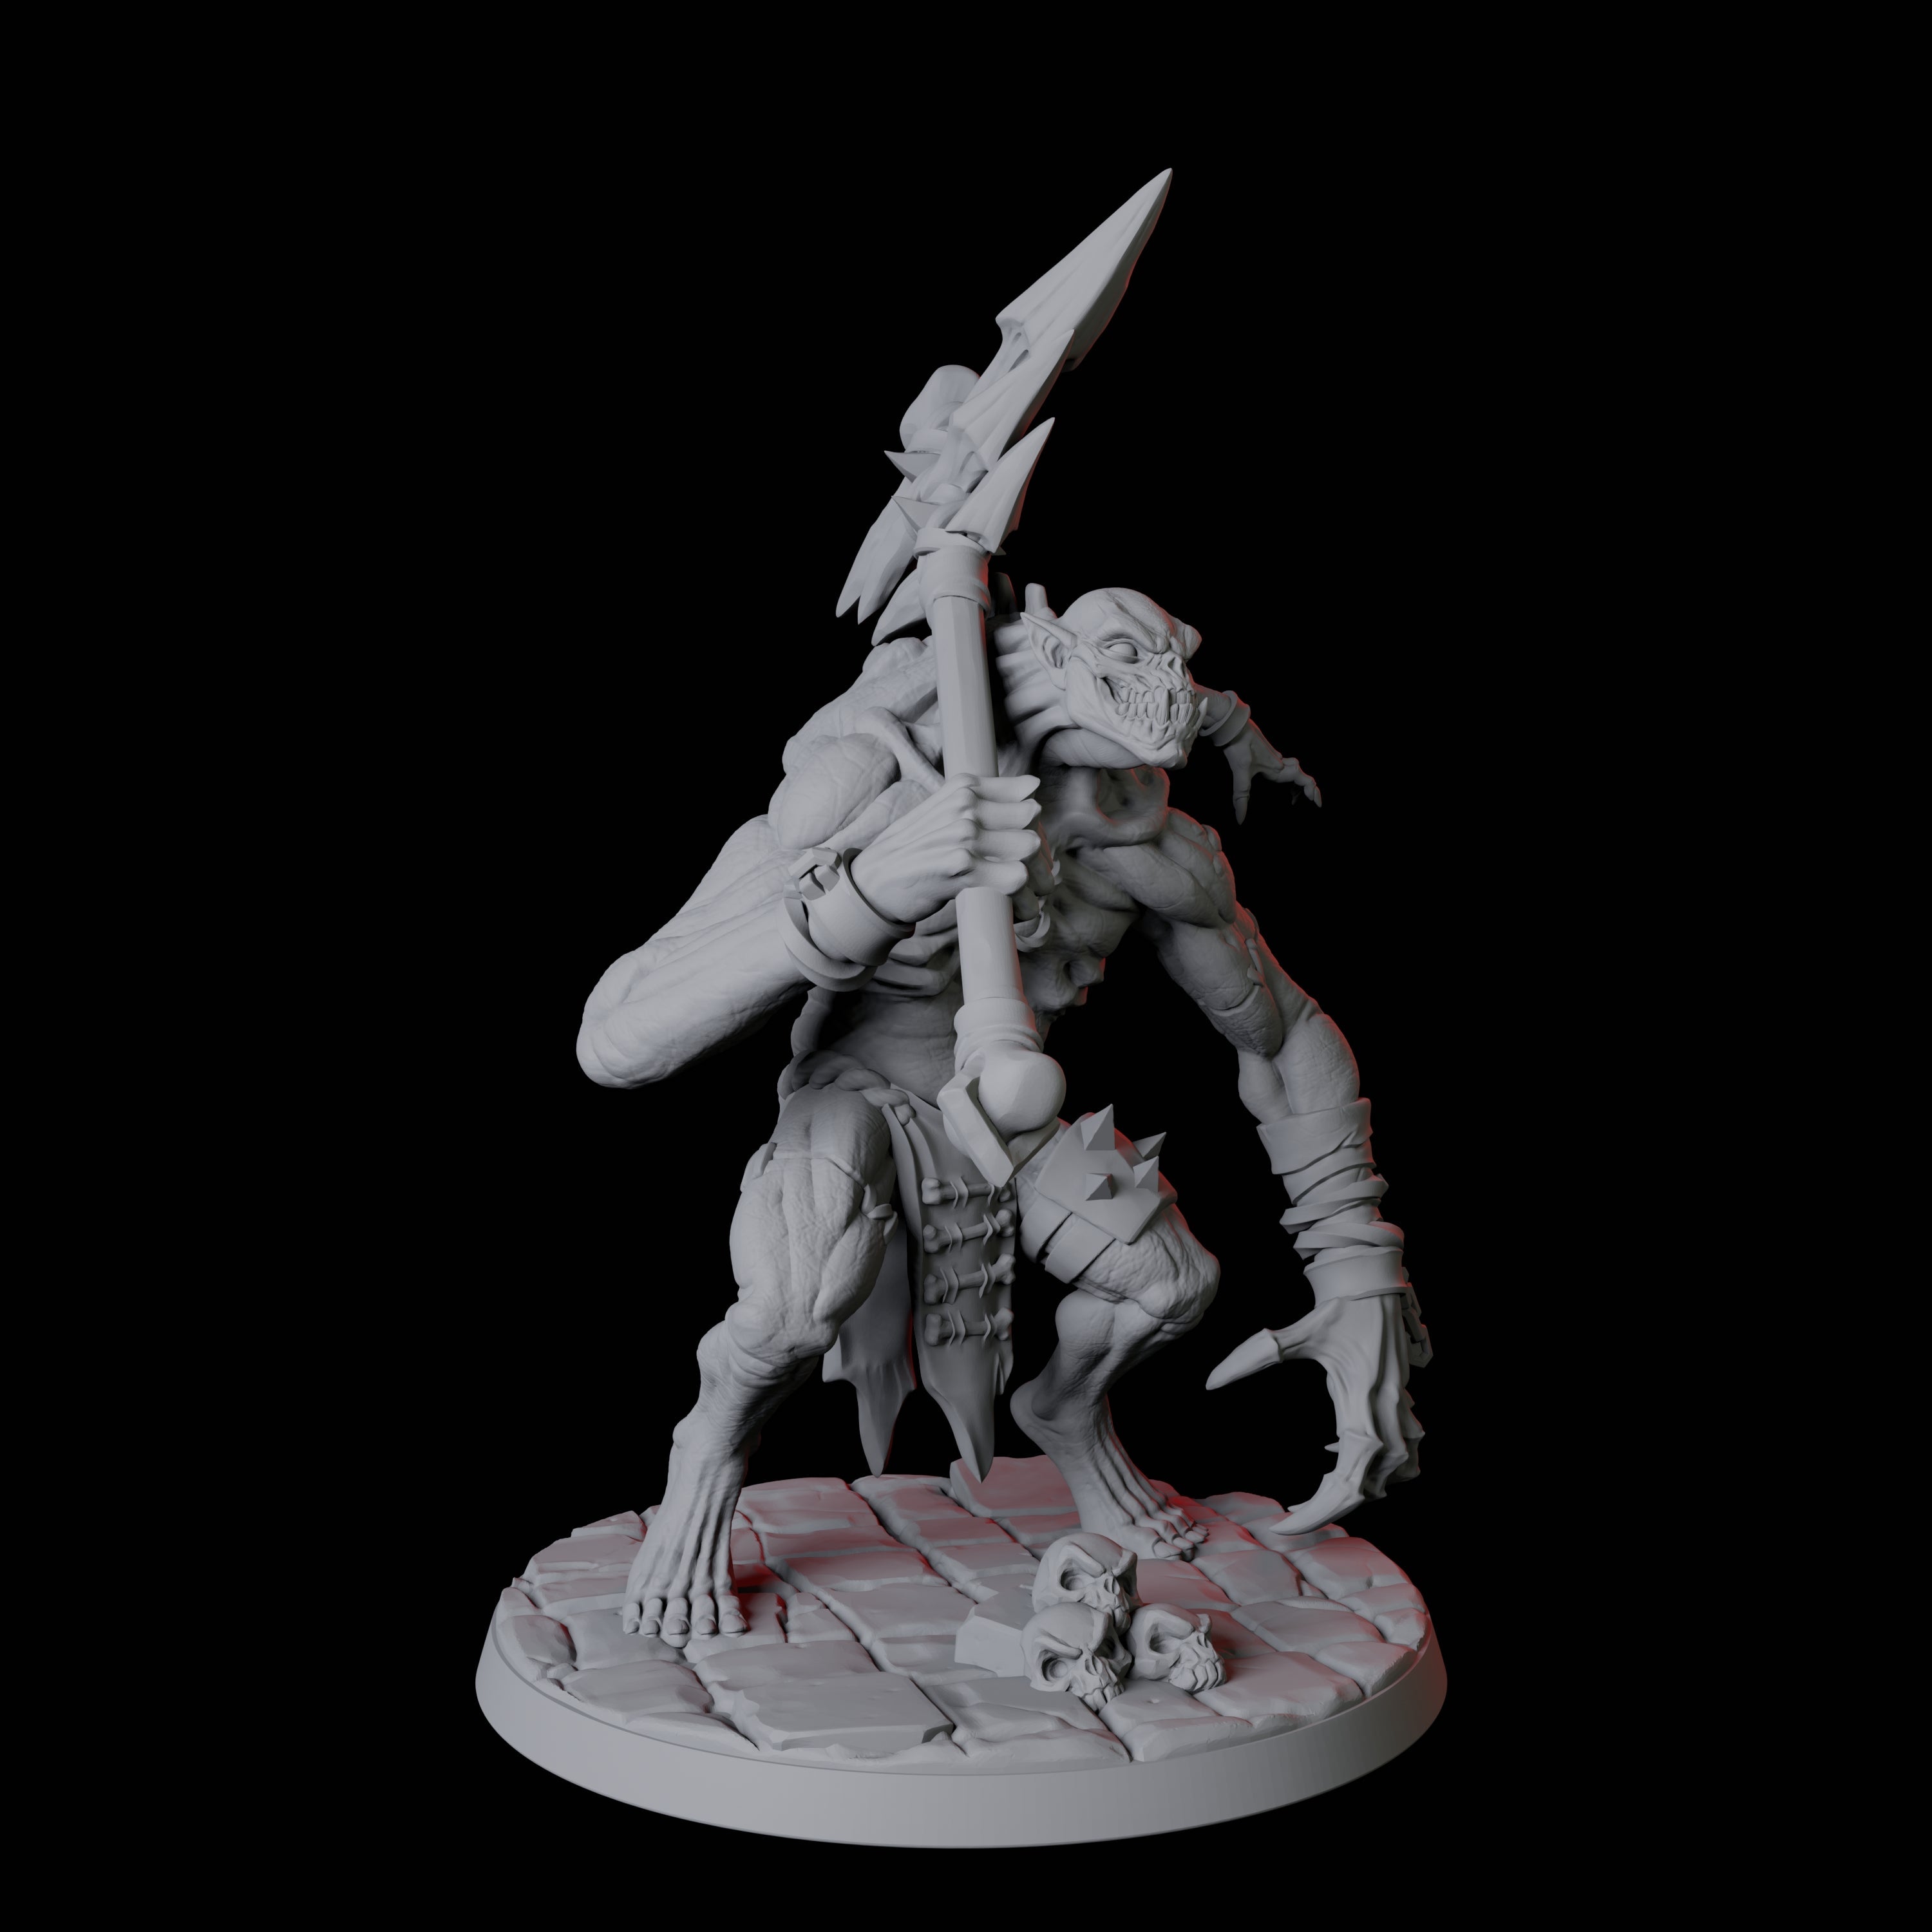 Roaming Ghast B Miniature for Dungeons and Dragons, Pathfinder or other TTRPGs